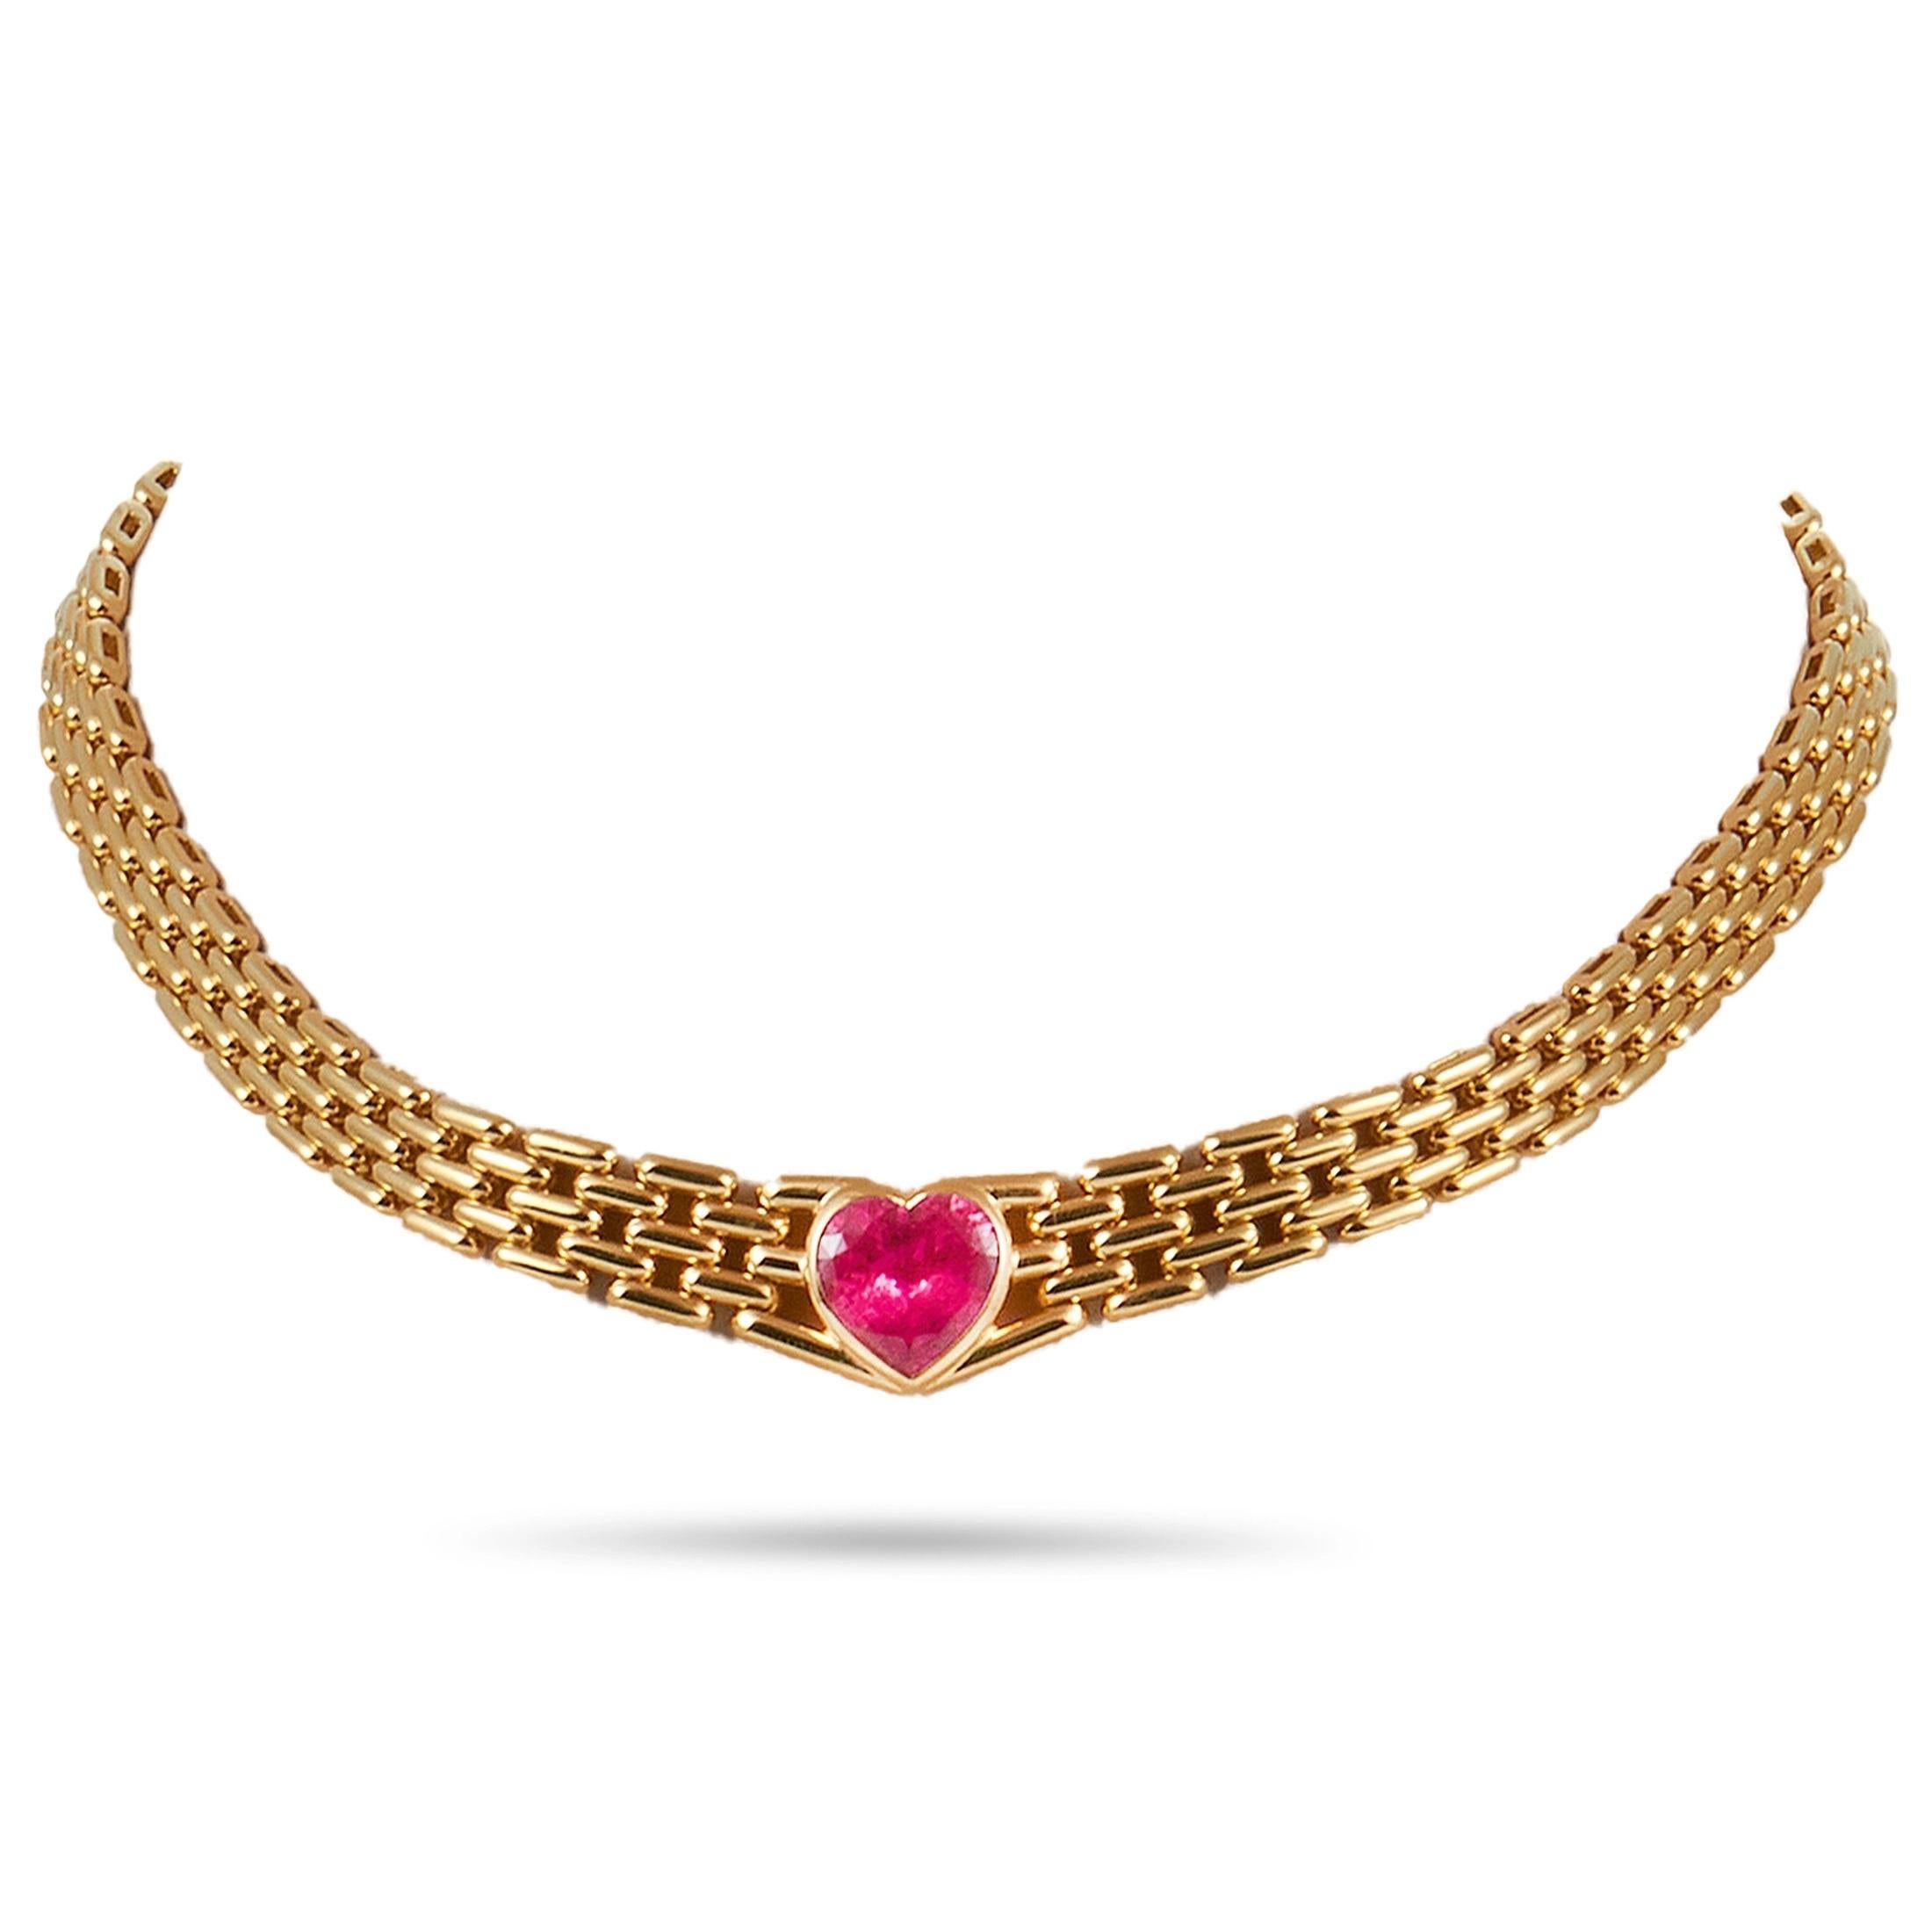 This Bvlgari necklace is made of 18K yellow gold and embellished with a rubellite. The necklace weighs 95 grams and measures 14” in length.
 
 Offered in estate condition, this jewelry piece includes the manufacturer’s box.